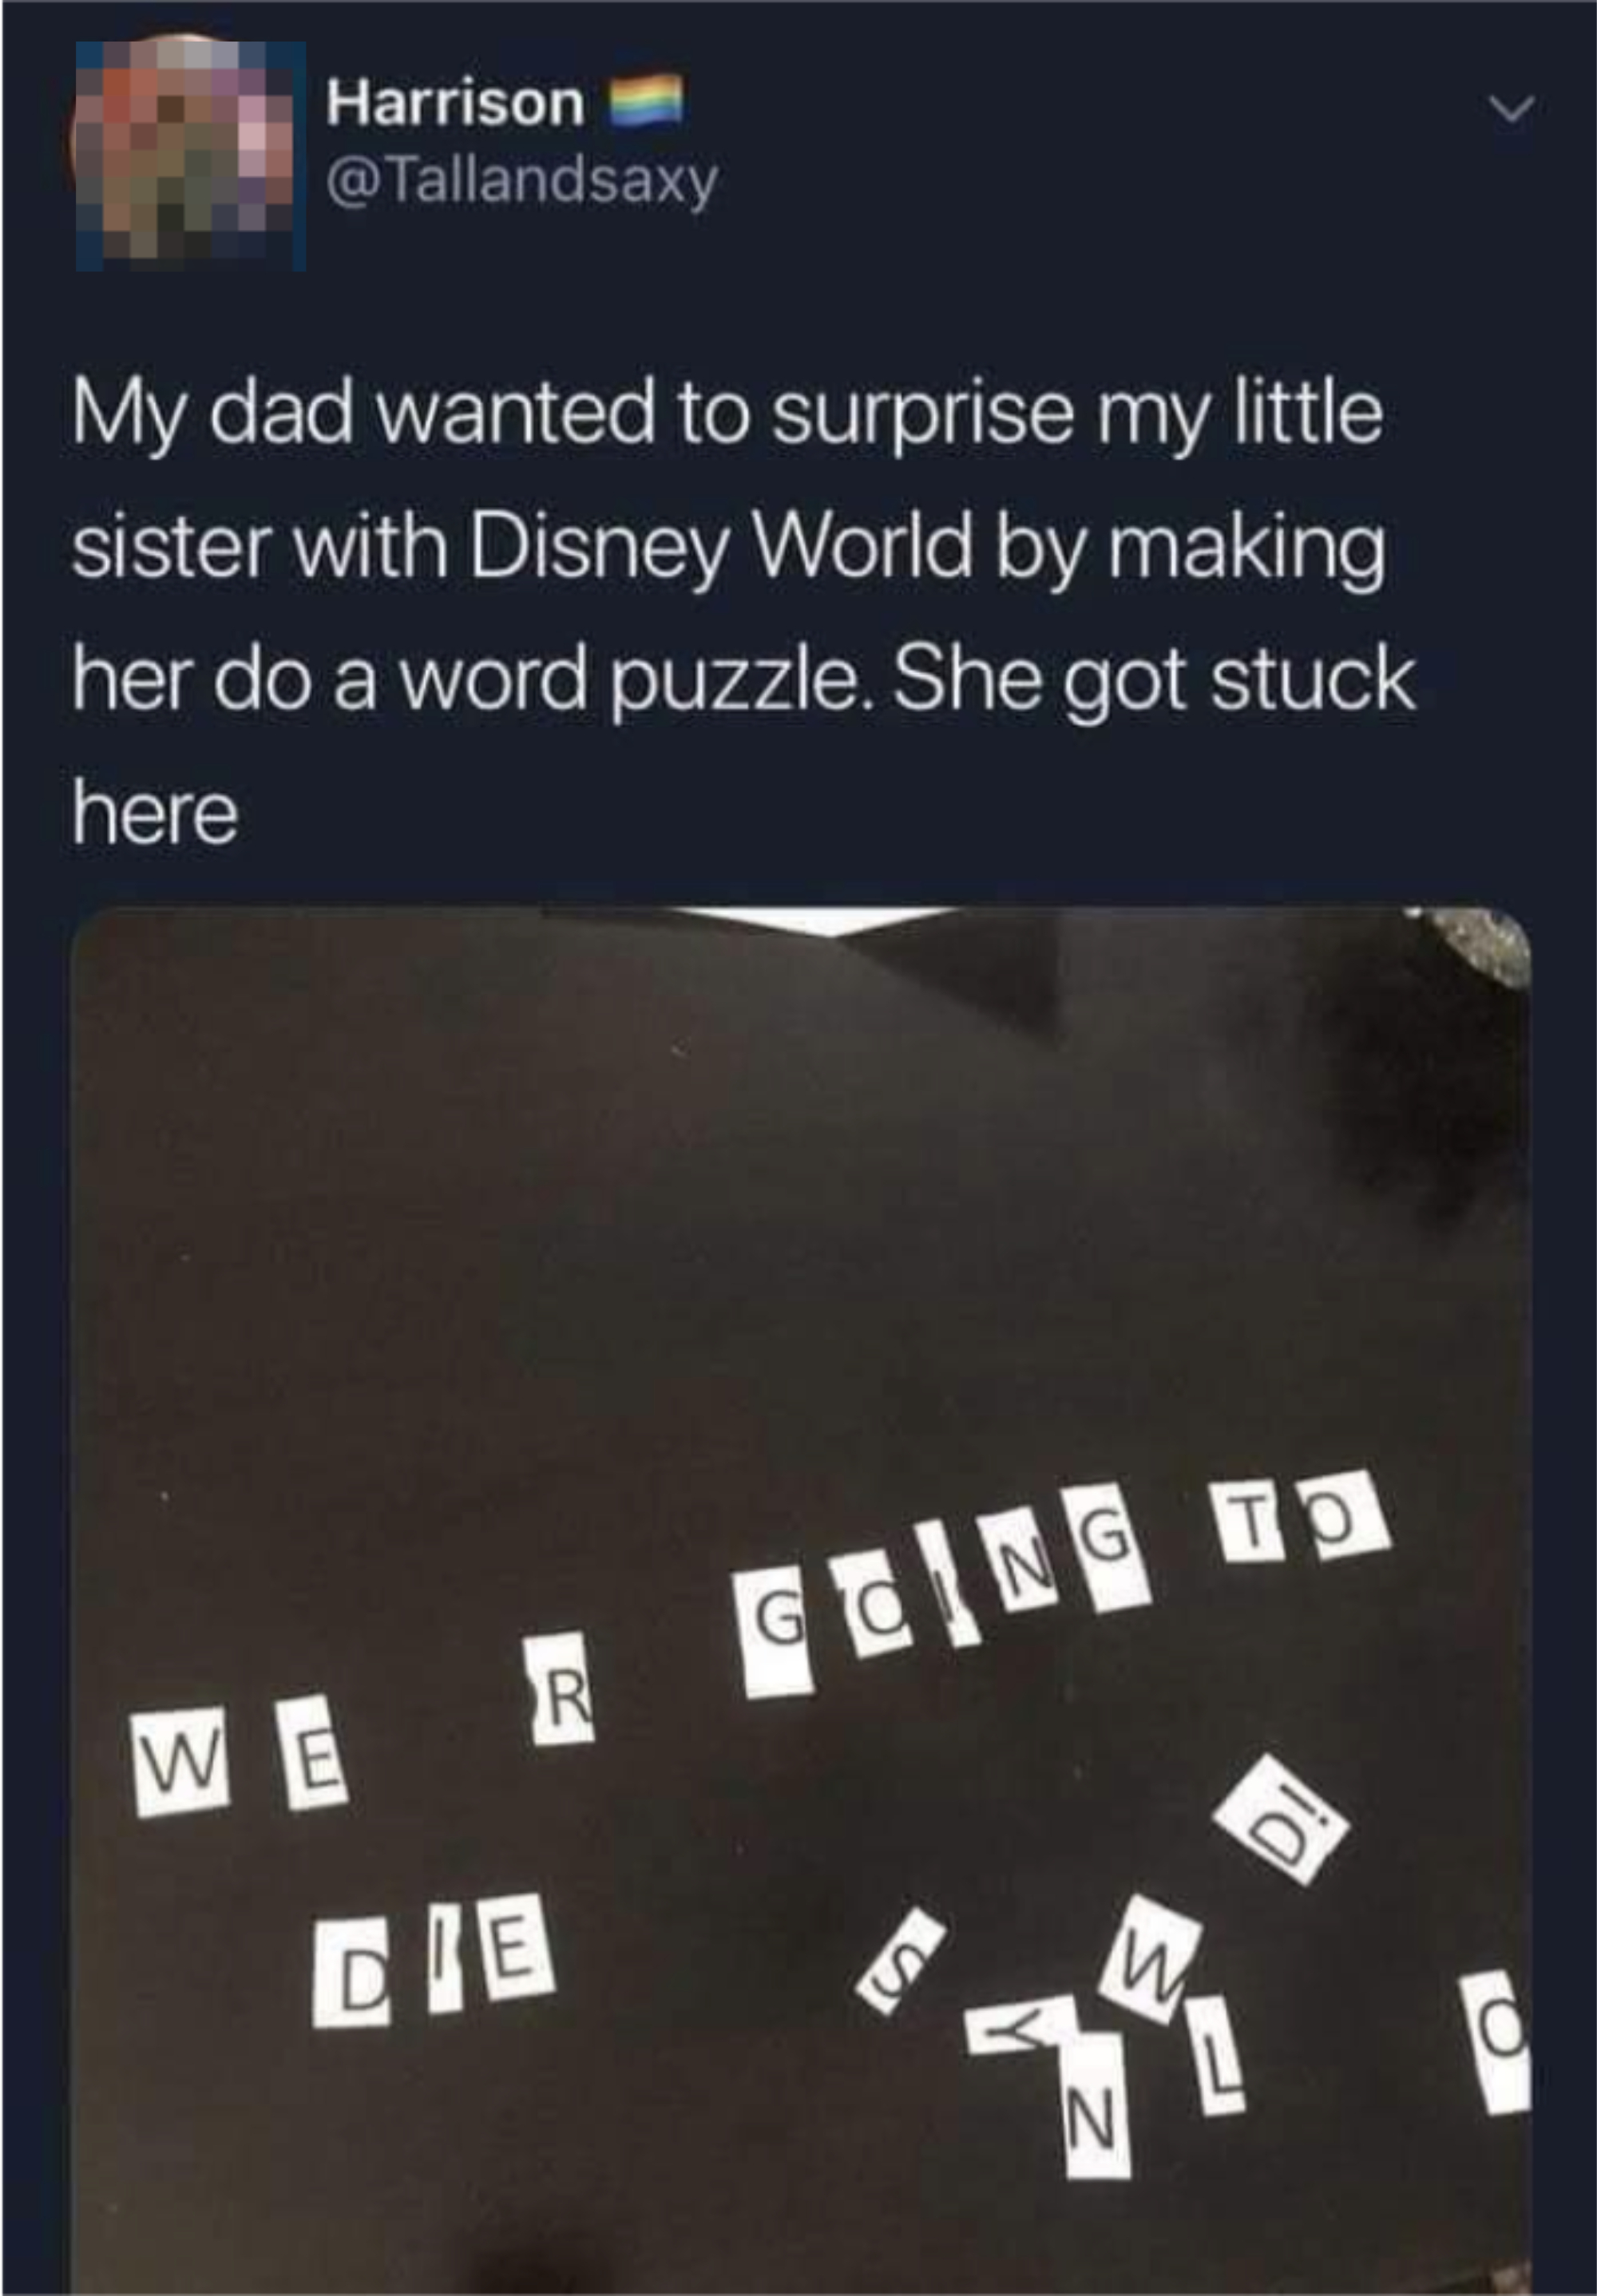 The image shows letters on a table arranged to spell &quot;WE ARE GOING TO DIE,&quot; a failed attempt at a surprise Disney World puzzle reveal